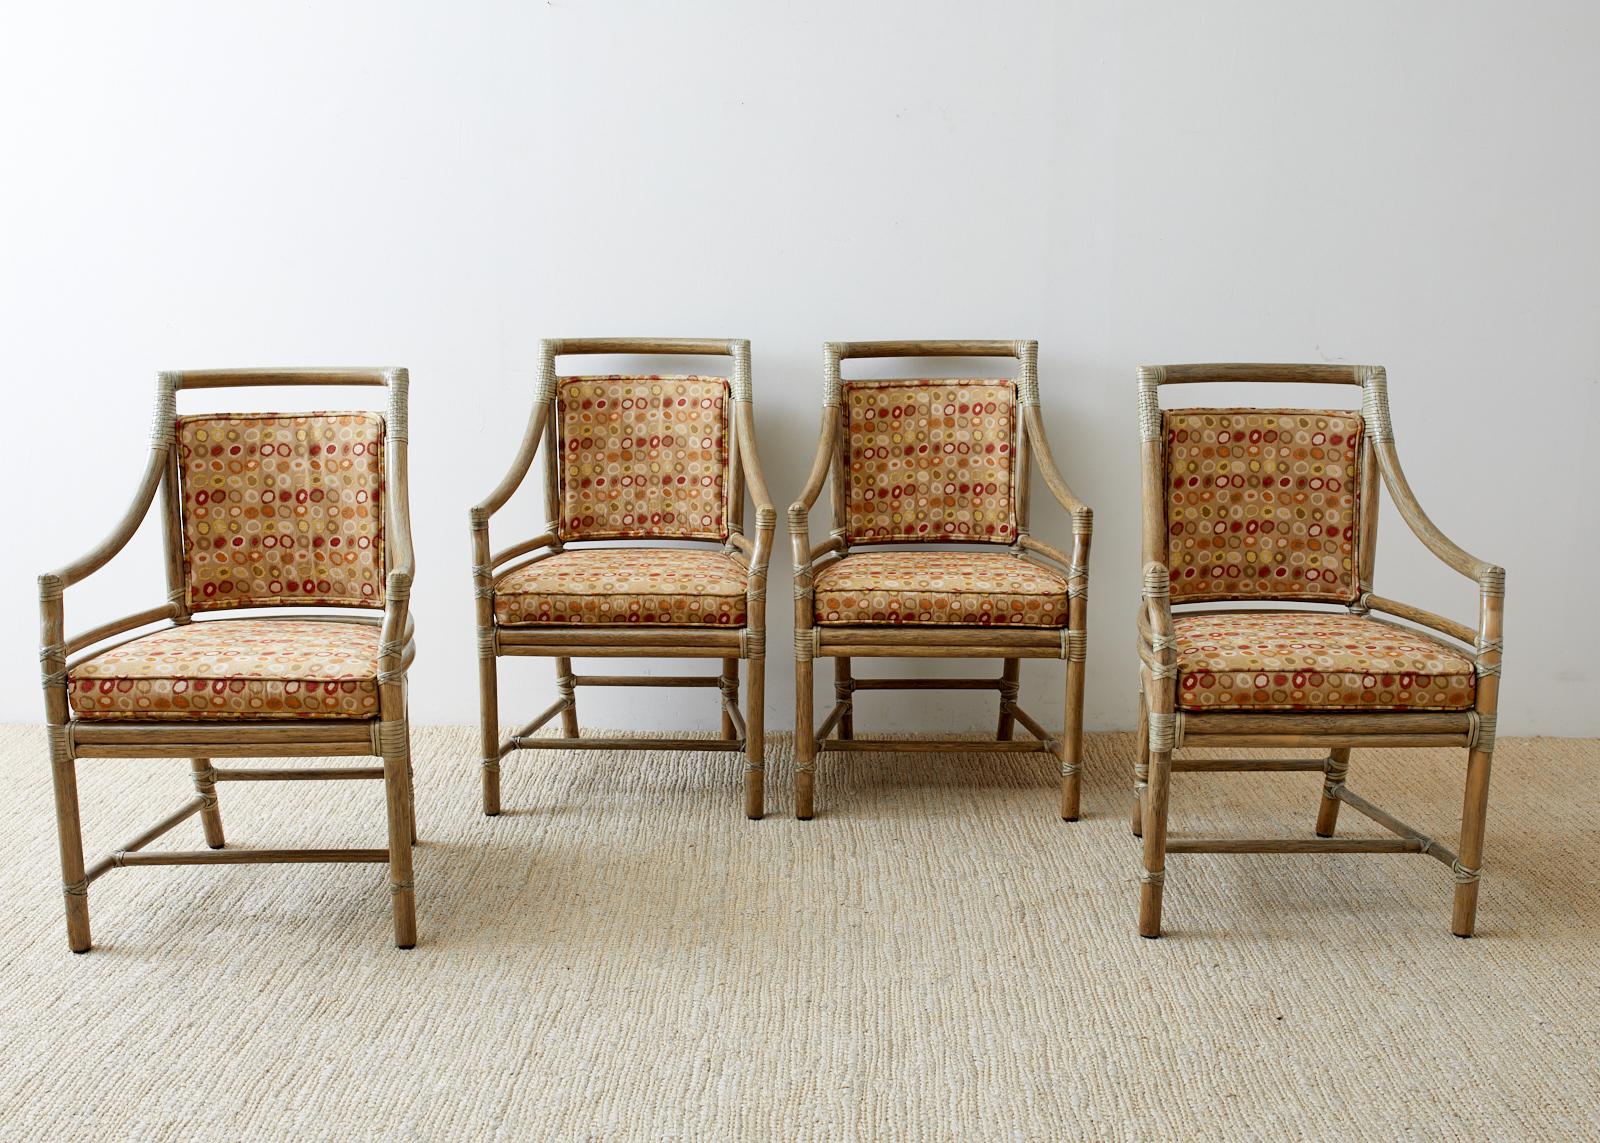 Stylish set of four genuine McGuire bamboo rattan target dining chairs or armchairs designed by Elinor McGuire. The frames feature the famous target motif on the back splat and are finished in bespoke mushroom shade. Upholstered with a midcentury